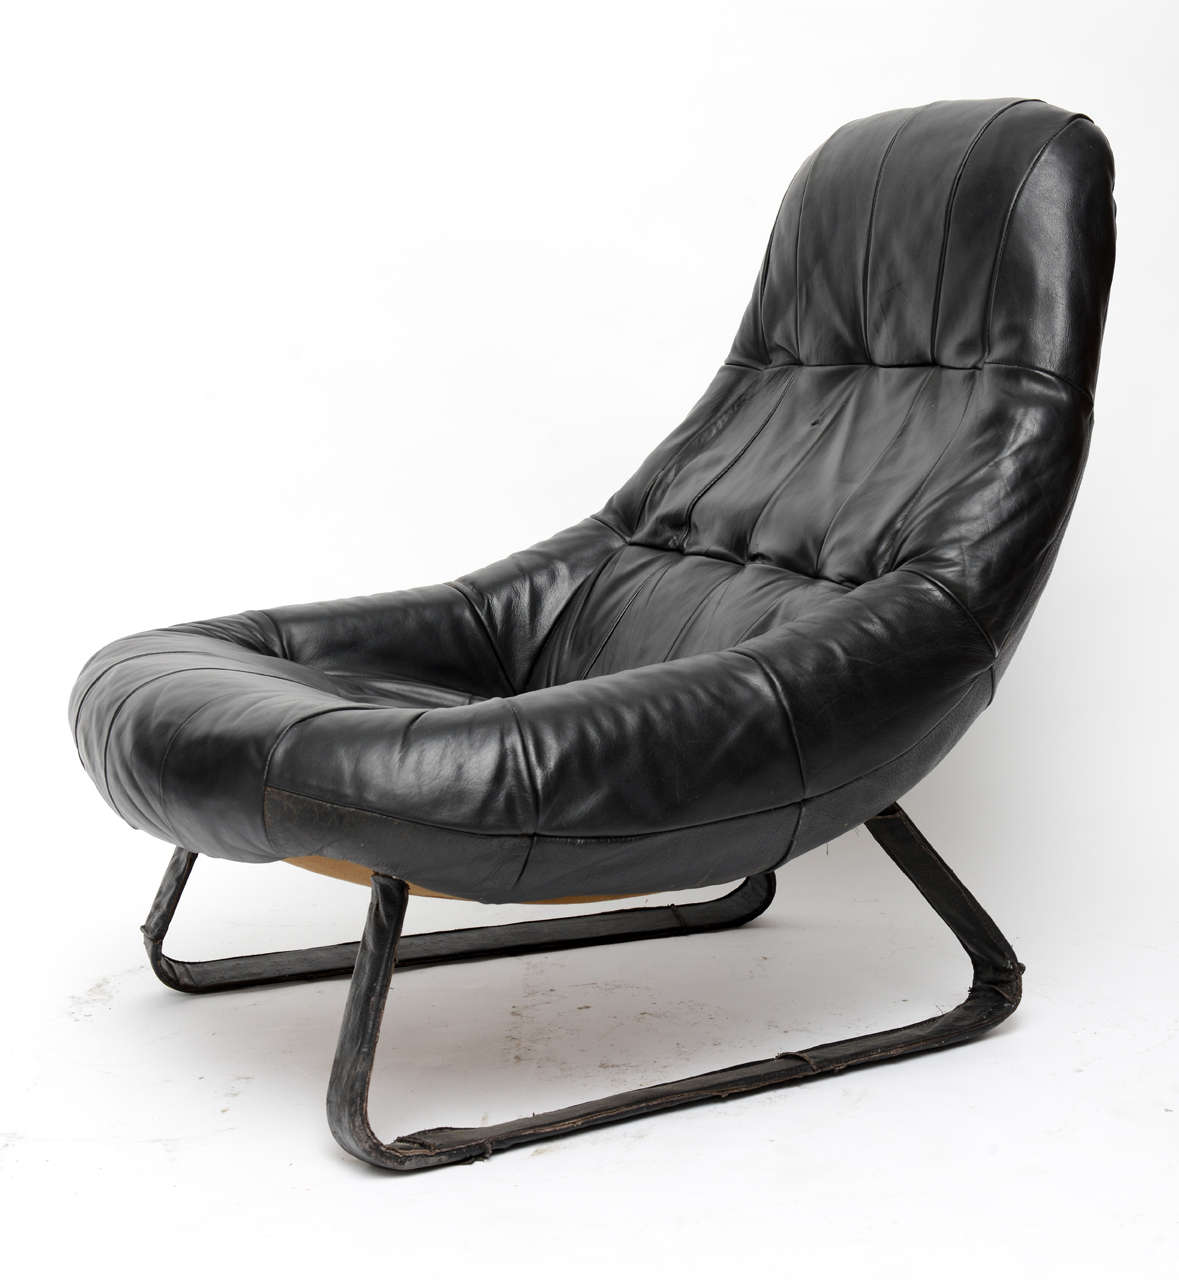 Leather Lafer Earth chair.